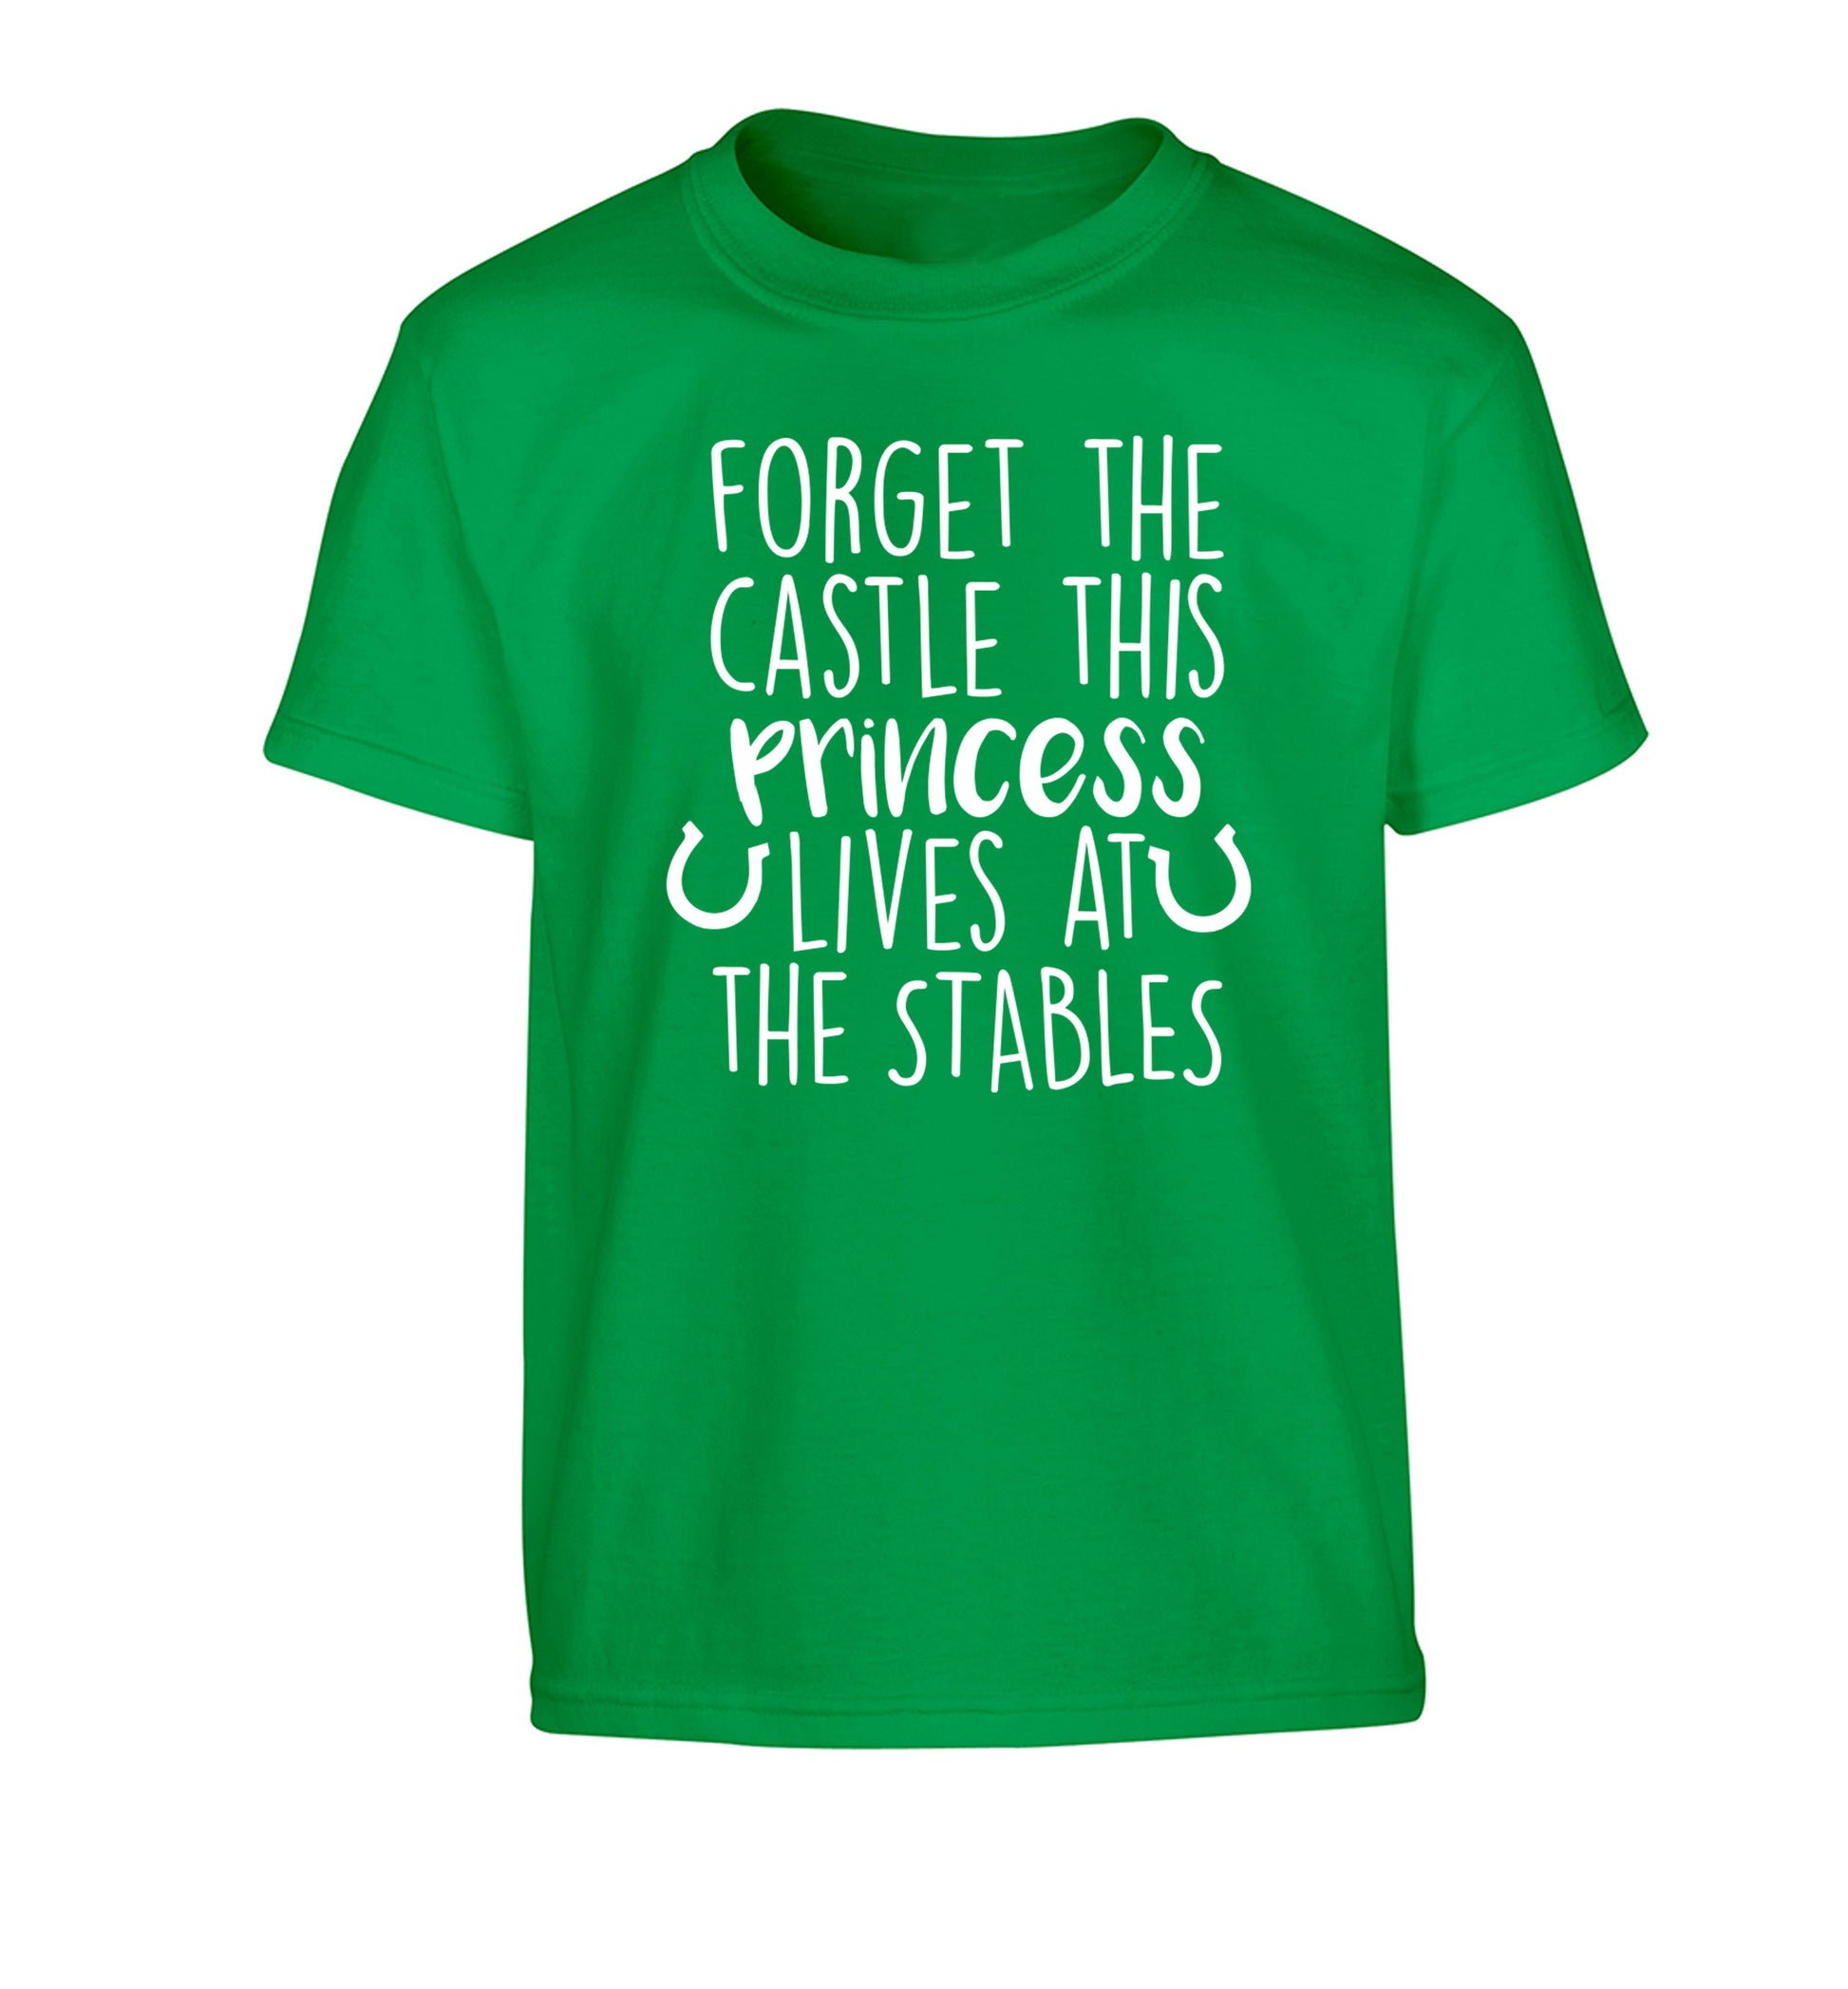 Forget the castle this princess lives at the stables Children's green Tshirt 12-14 Years